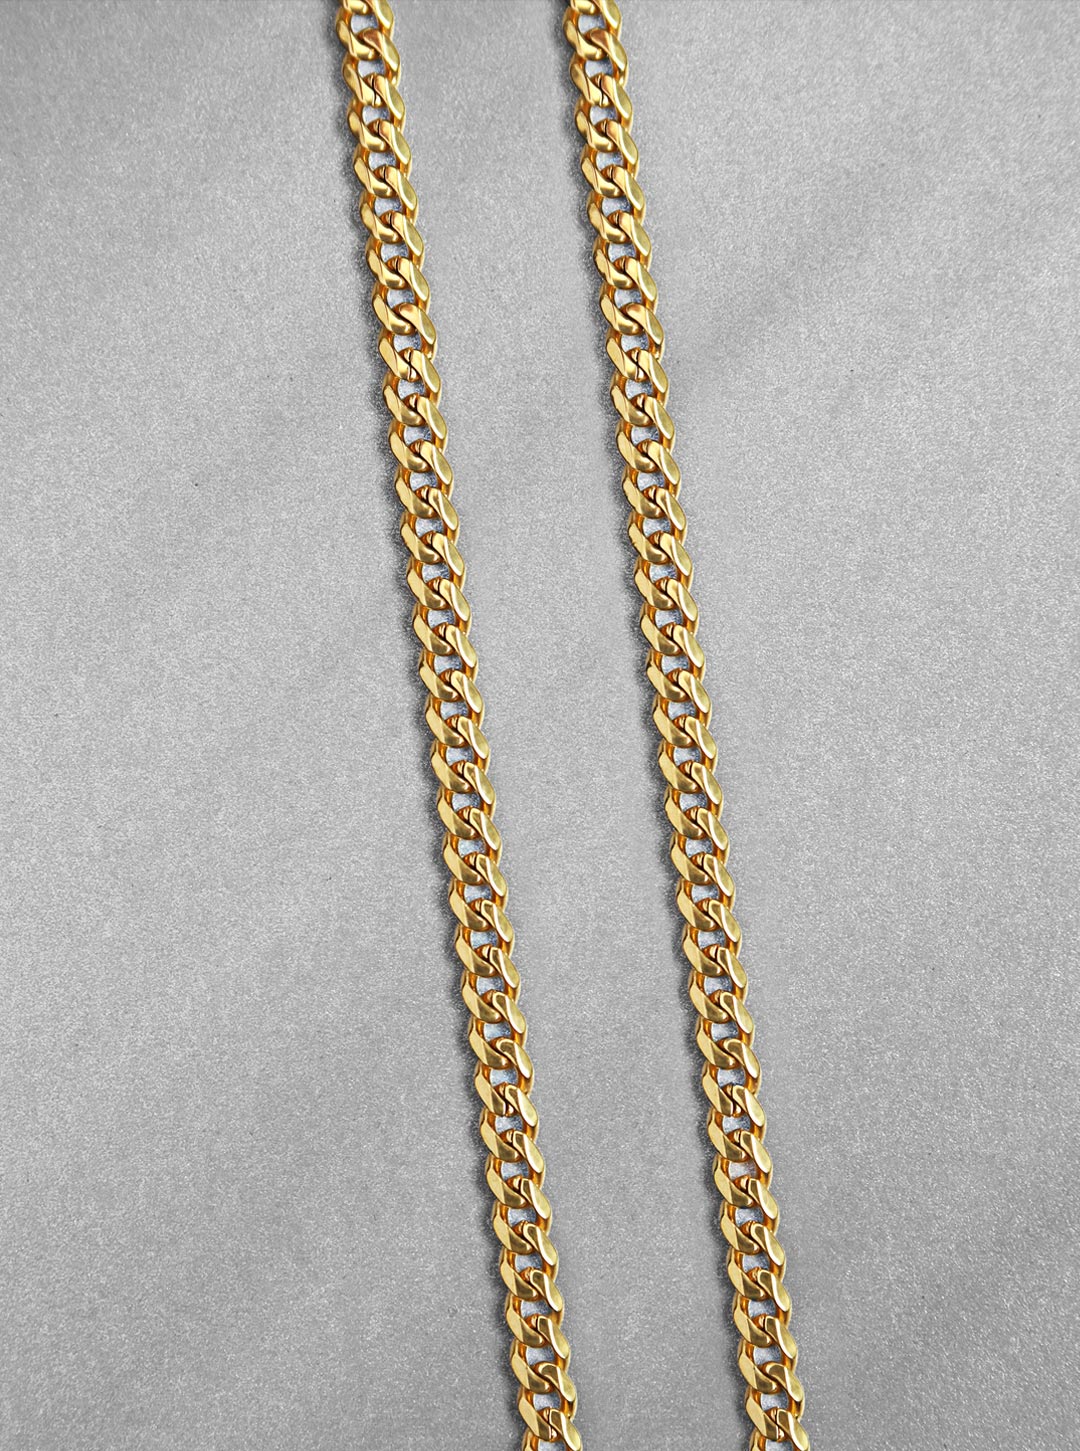 men's cuban style necklace in gold tone color